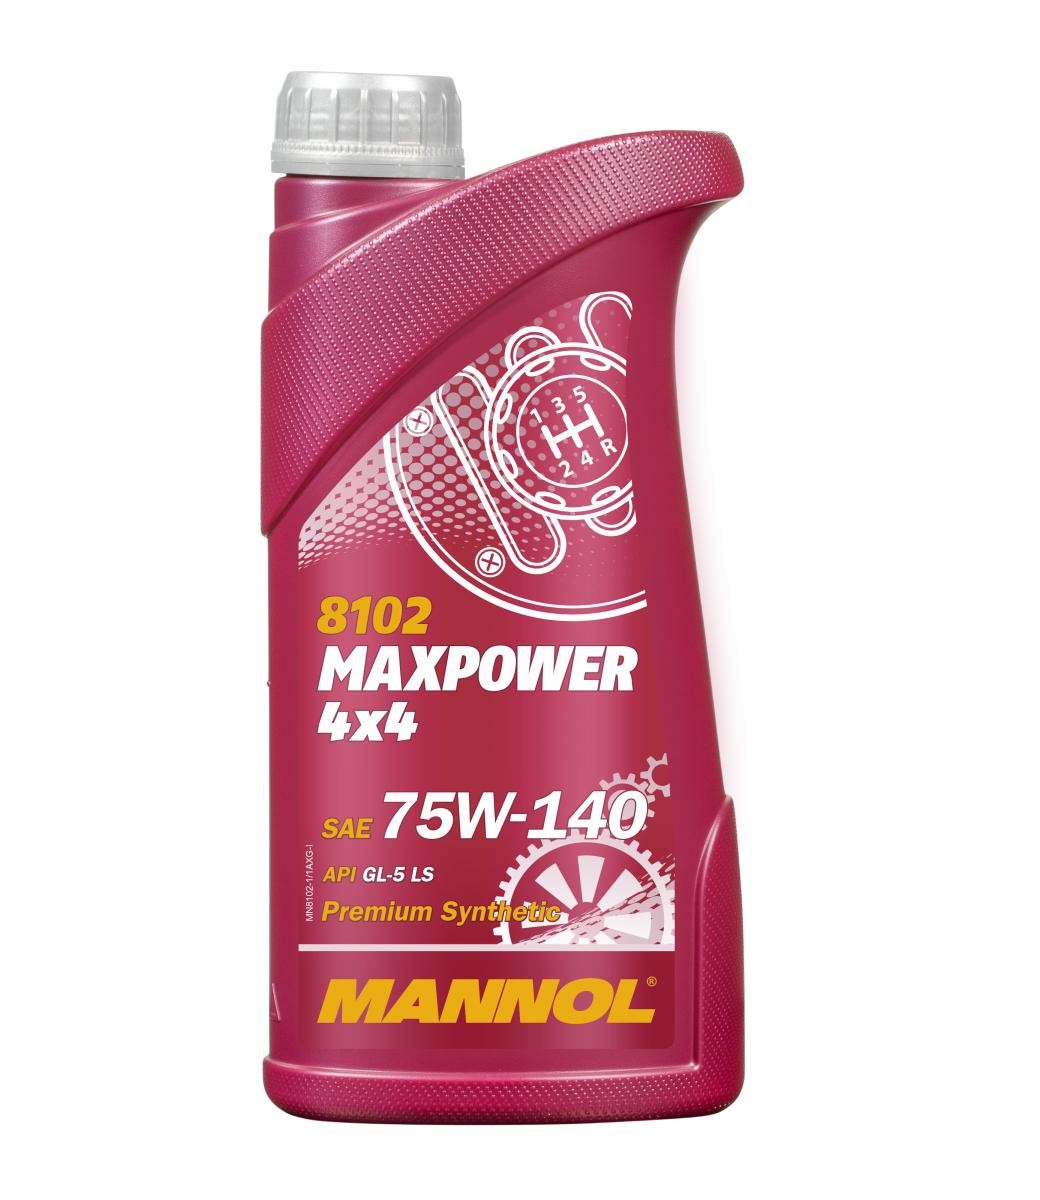 MANNOL MAXPOWER 4x4 MN8102-1 Transmission fluid 75W-140, Full Synthetic Oil, Capacity: 1l